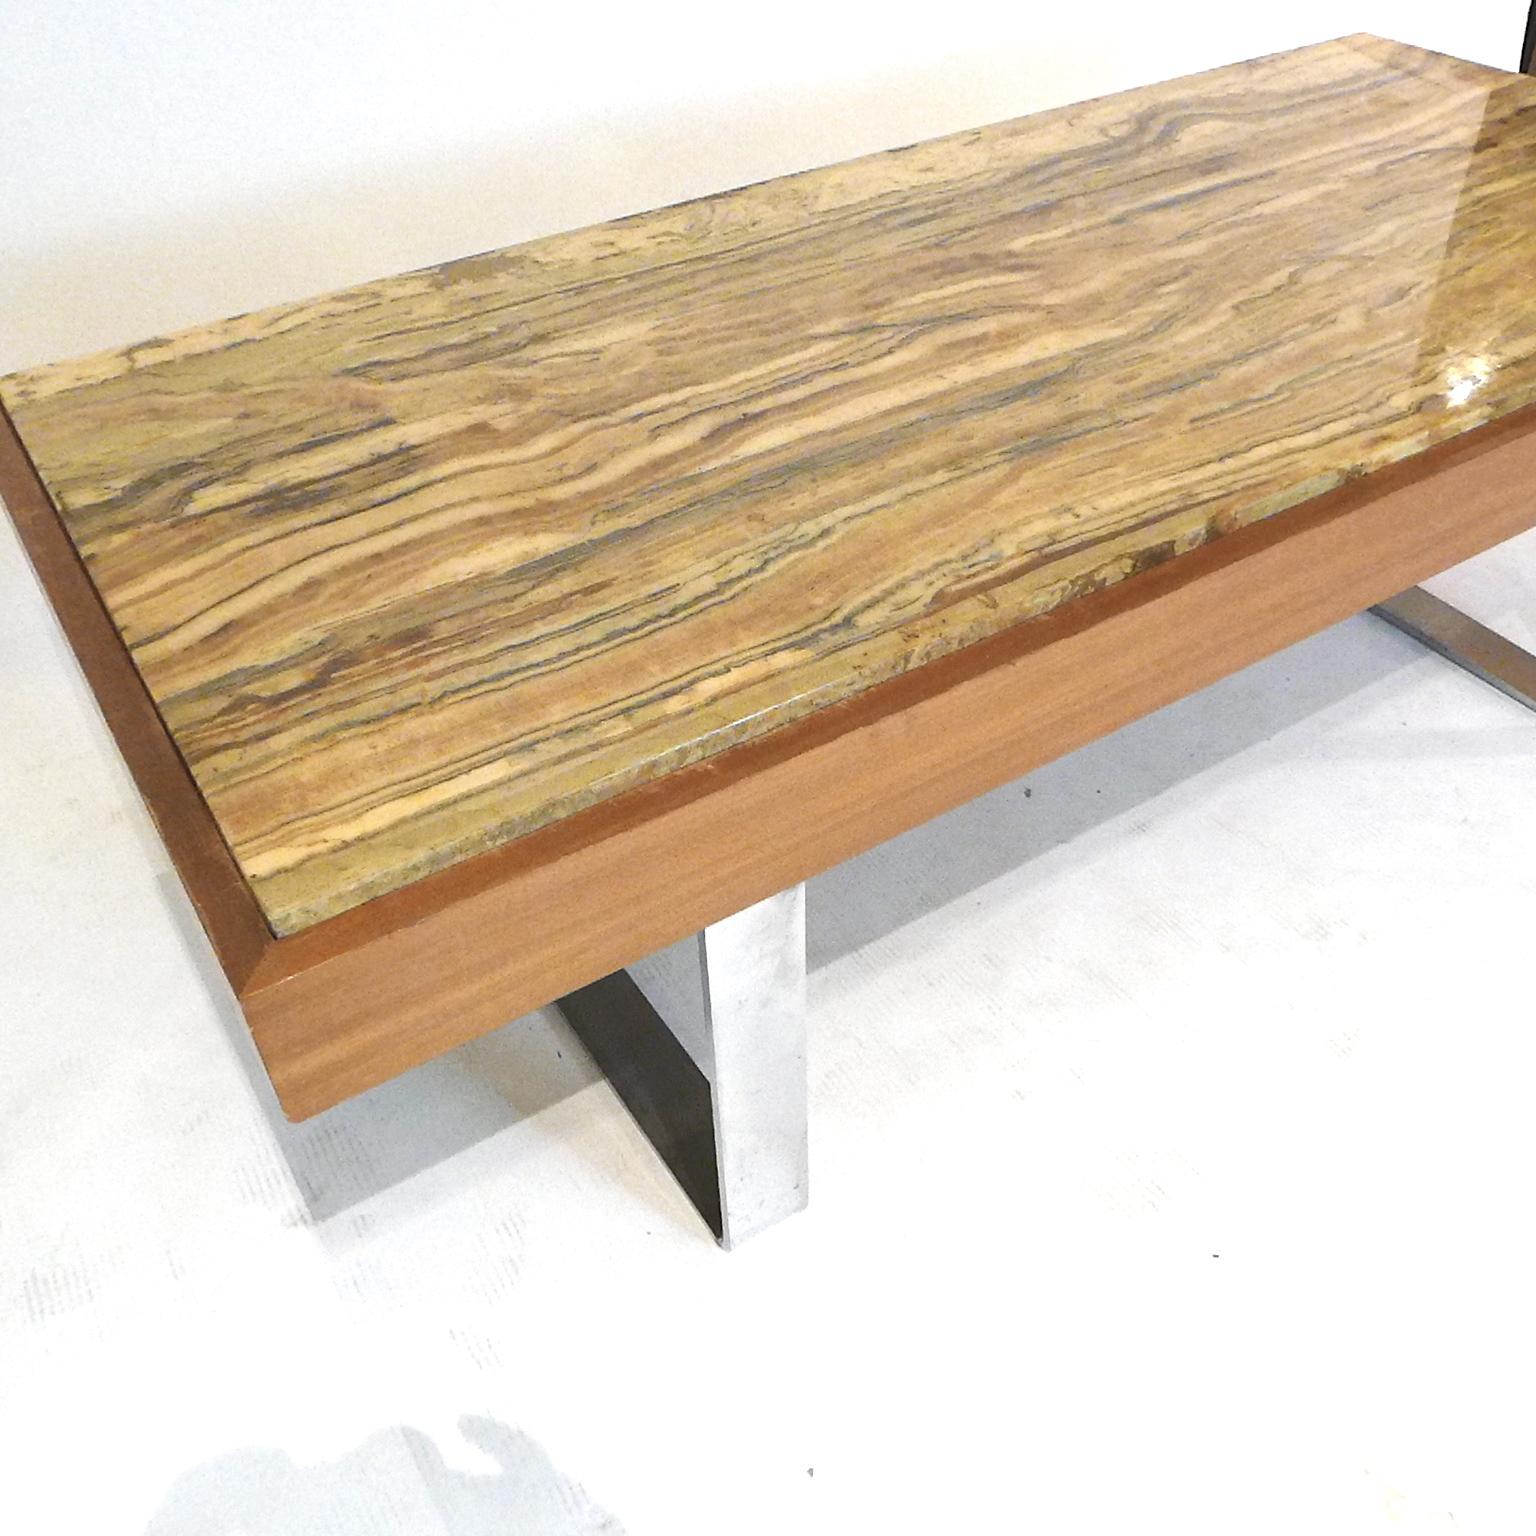 Ilse Möbel Coffee Table with Rare 'Onyx Travertine', Teak & Chrome from Germany 2